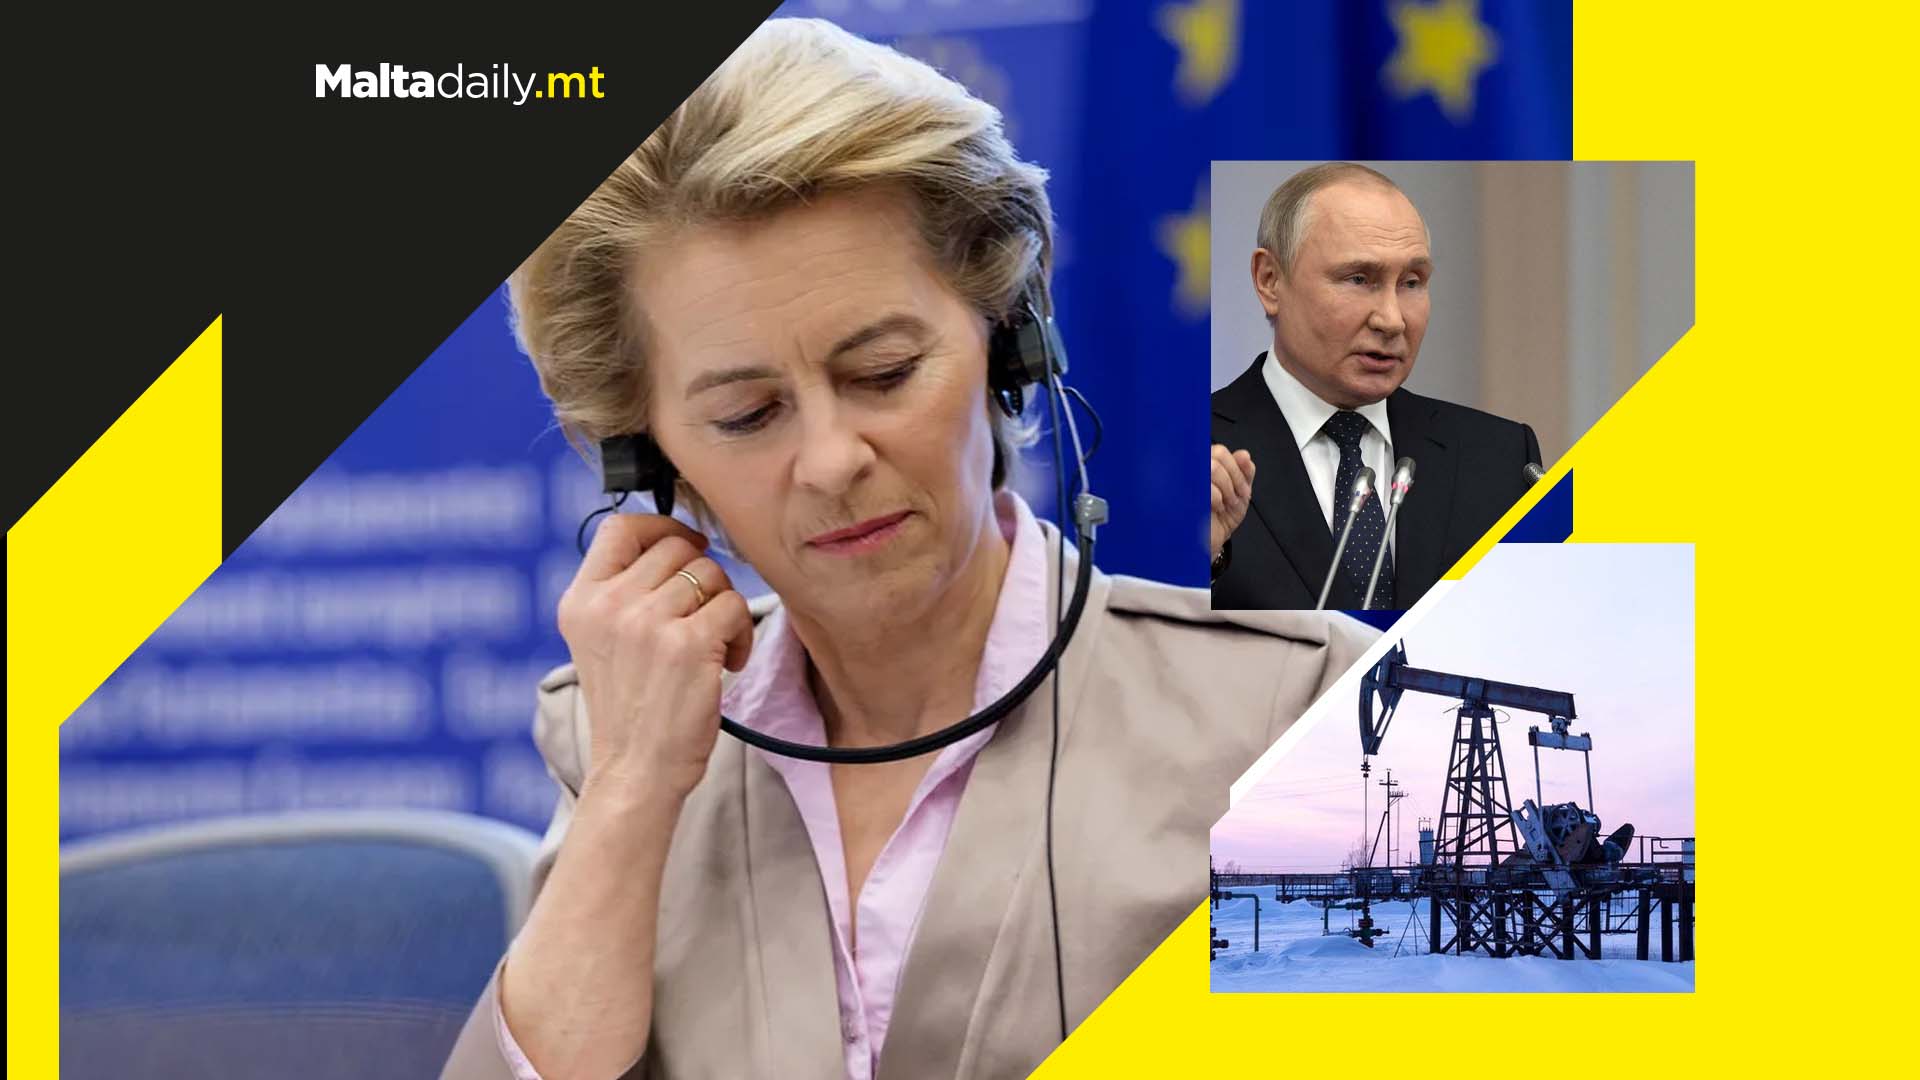 Russian oil will be completely banned within six months says Von der Leyen